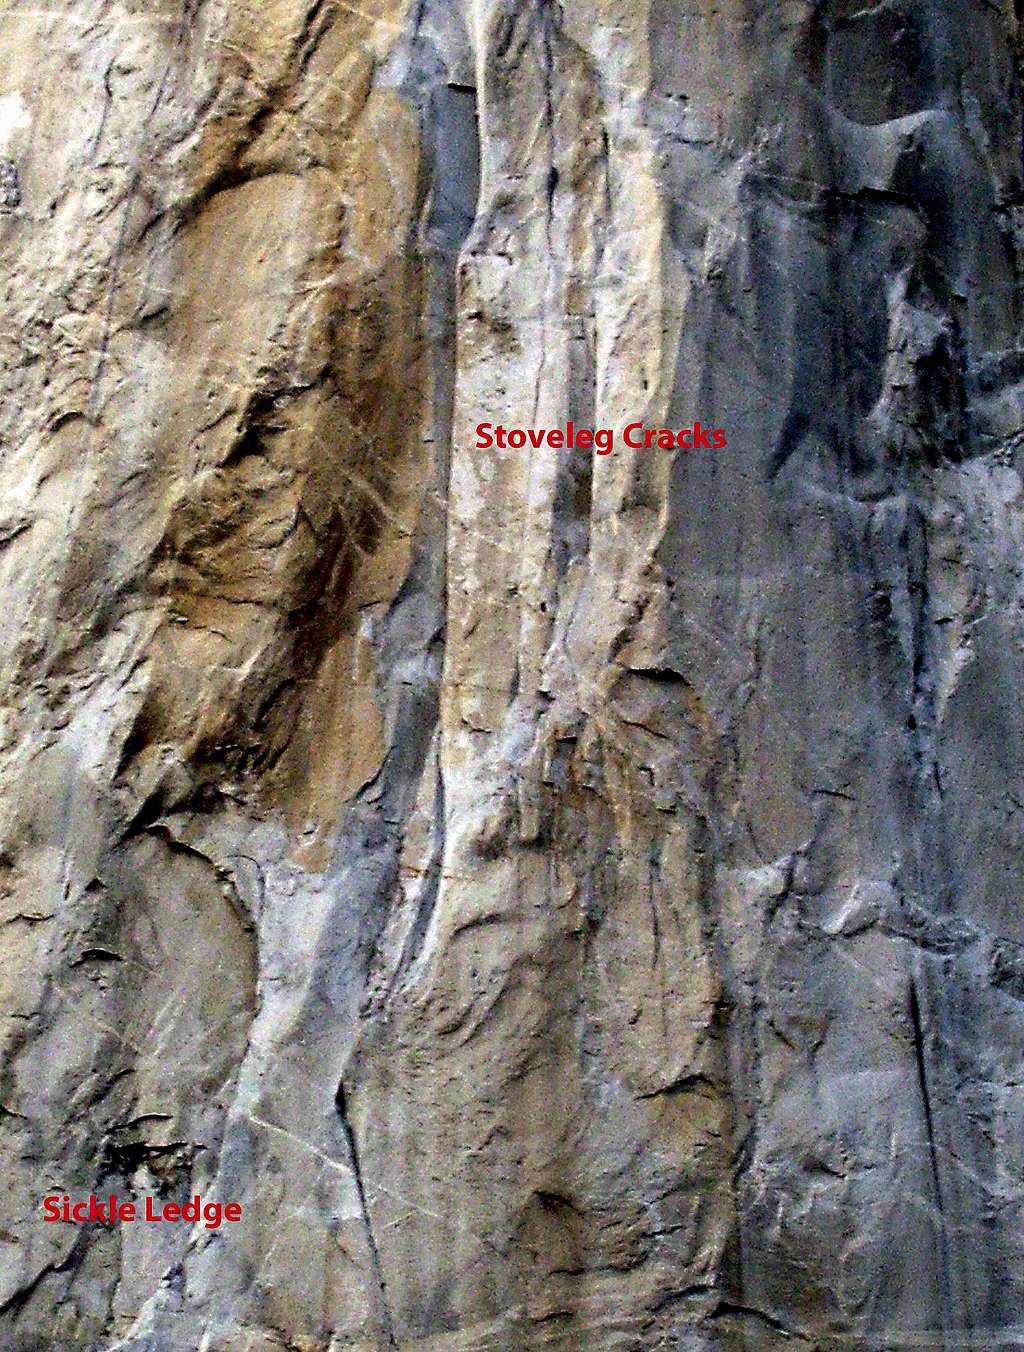 A portion of the Nose route on El Cap